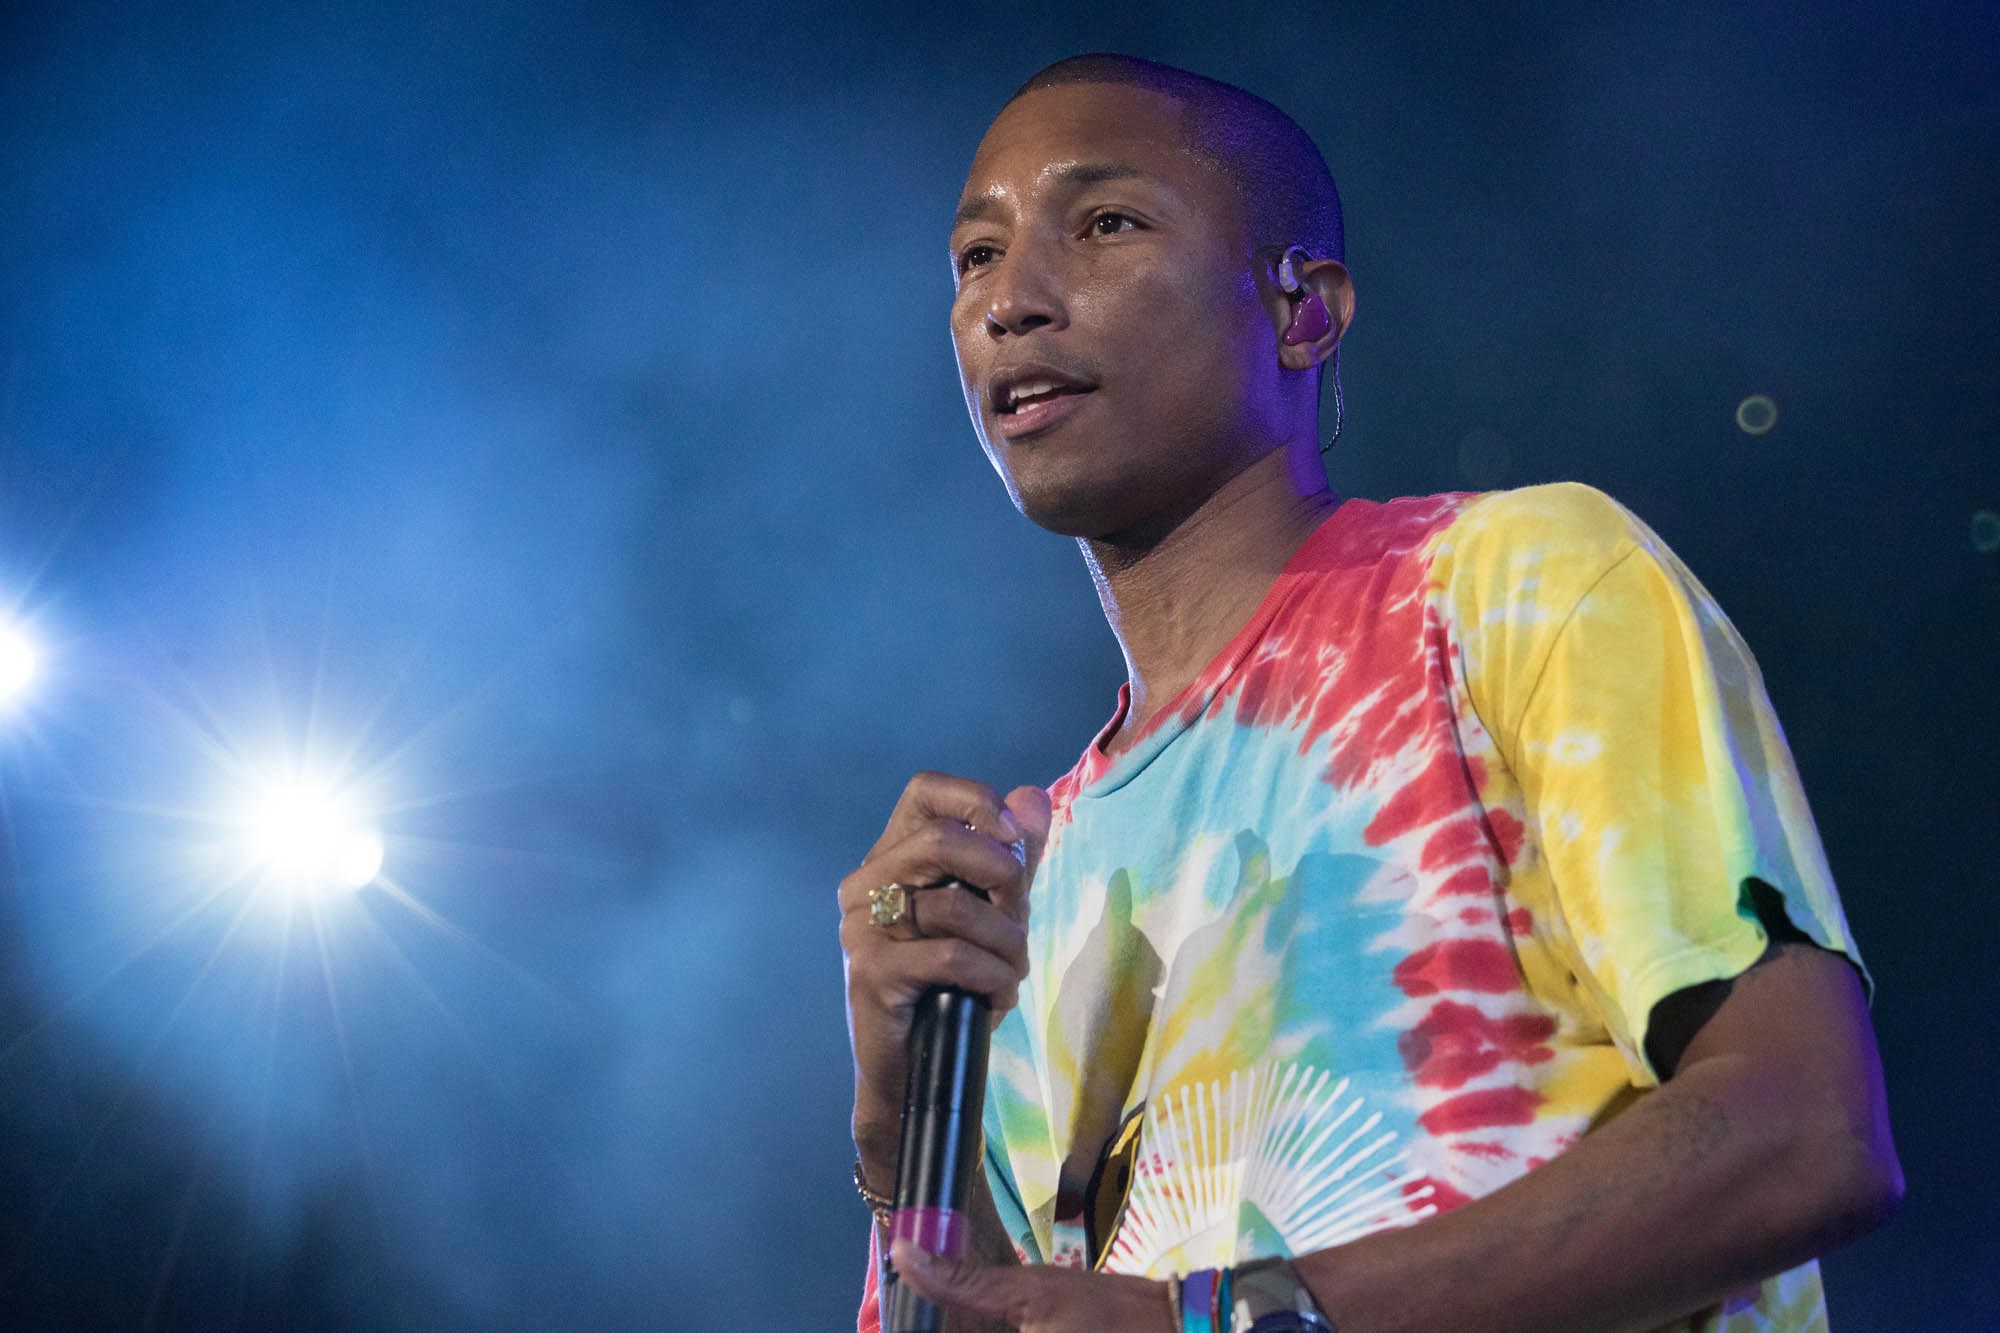 Pharrell Williams holding a microphone